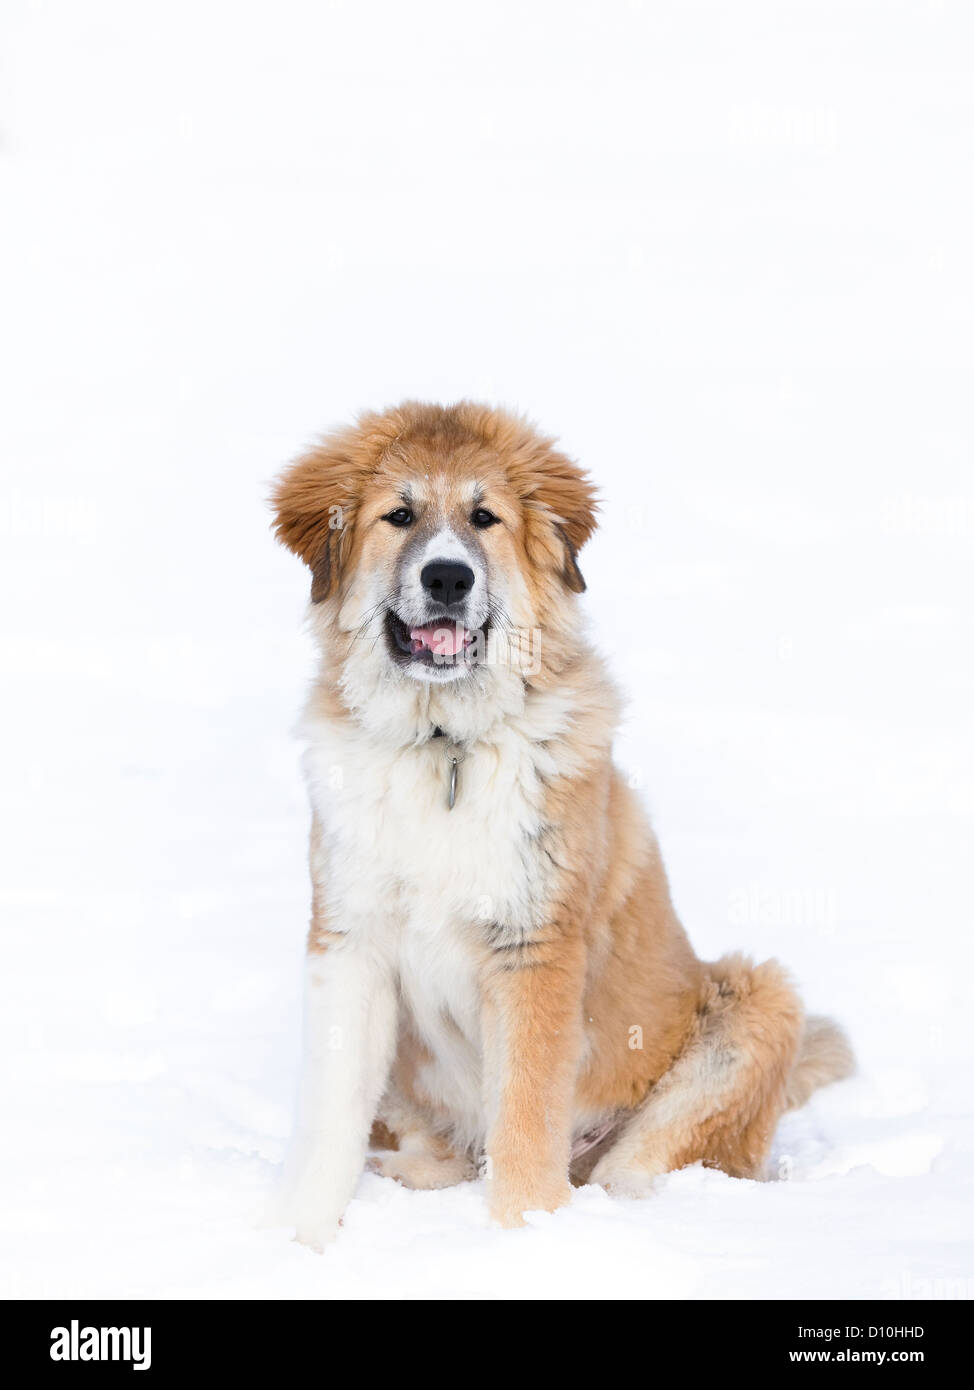 Large, mixed breed puppy, sitting in snow, Manitoba, Canada. Stock Photo